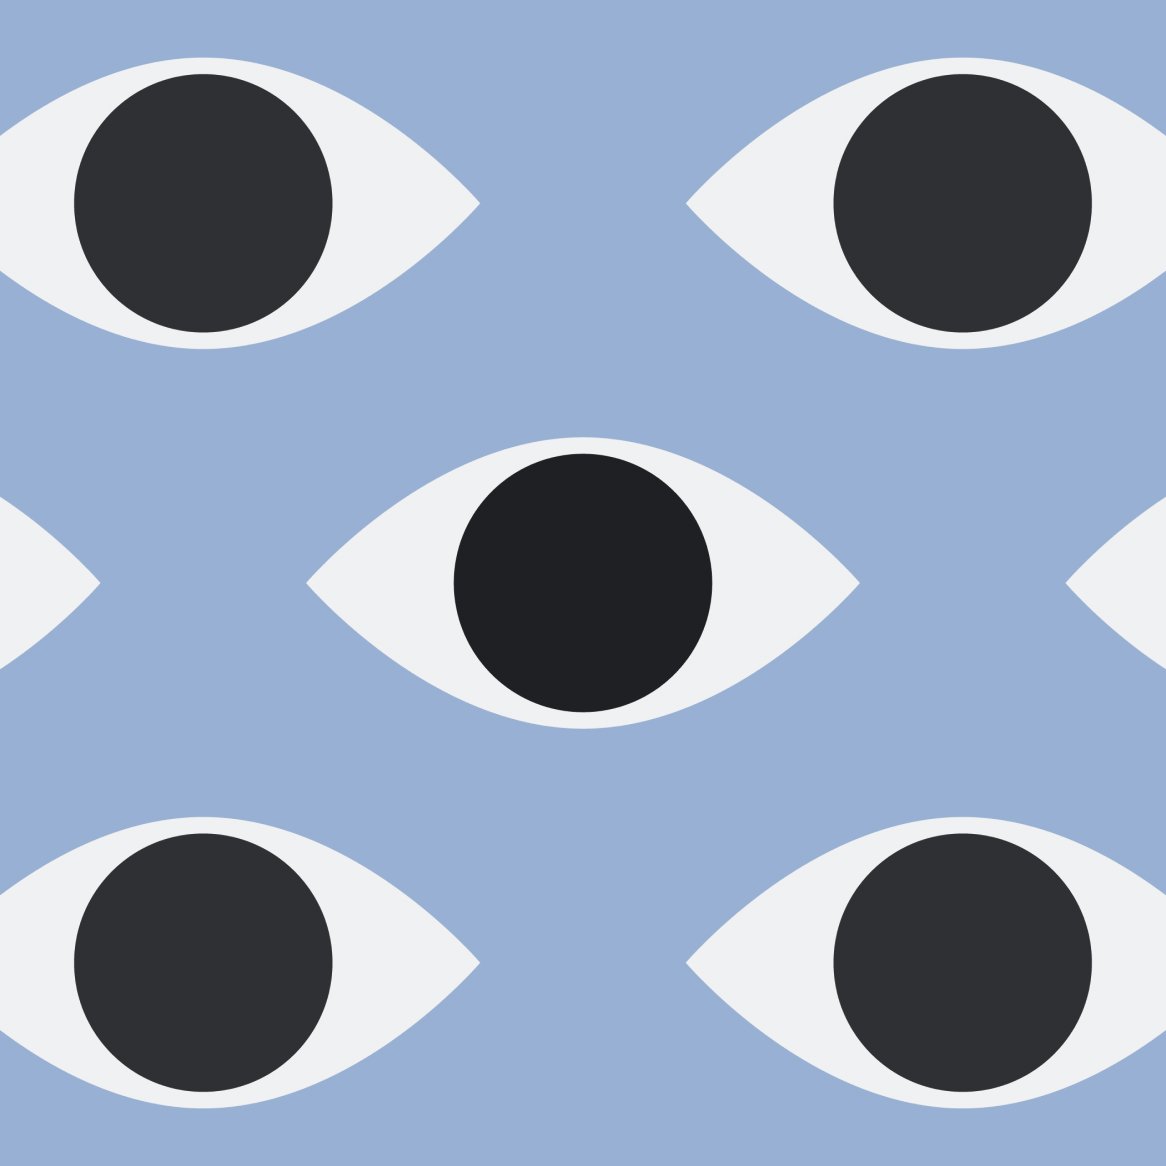 Artwork showing eyes on a blue background